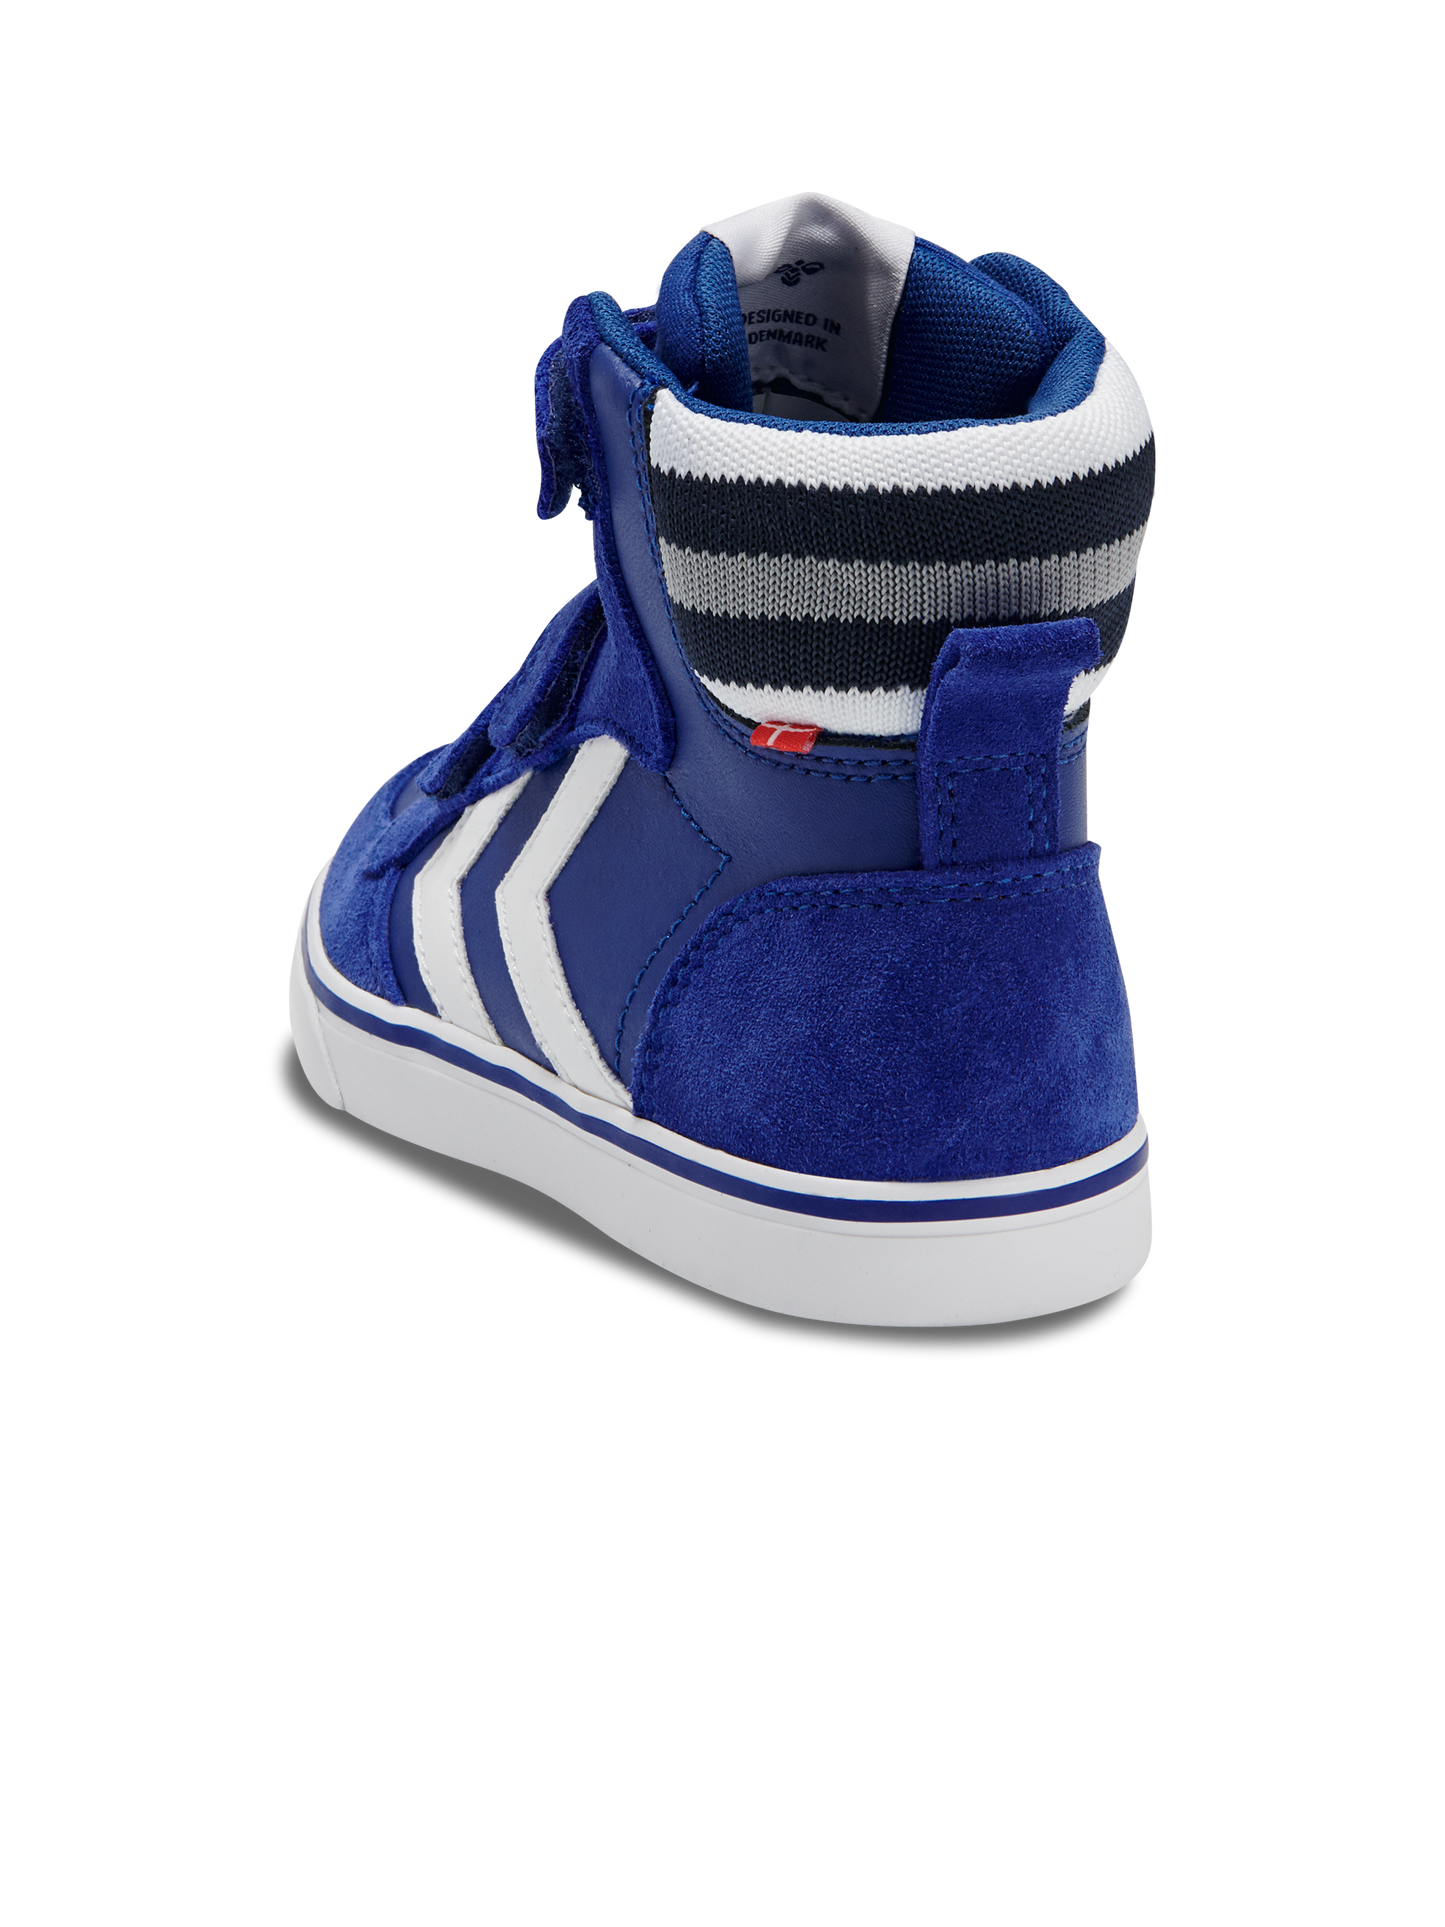 Hummel Stadil Pro Junior Leather and Suede Mazarine Blue Trainers